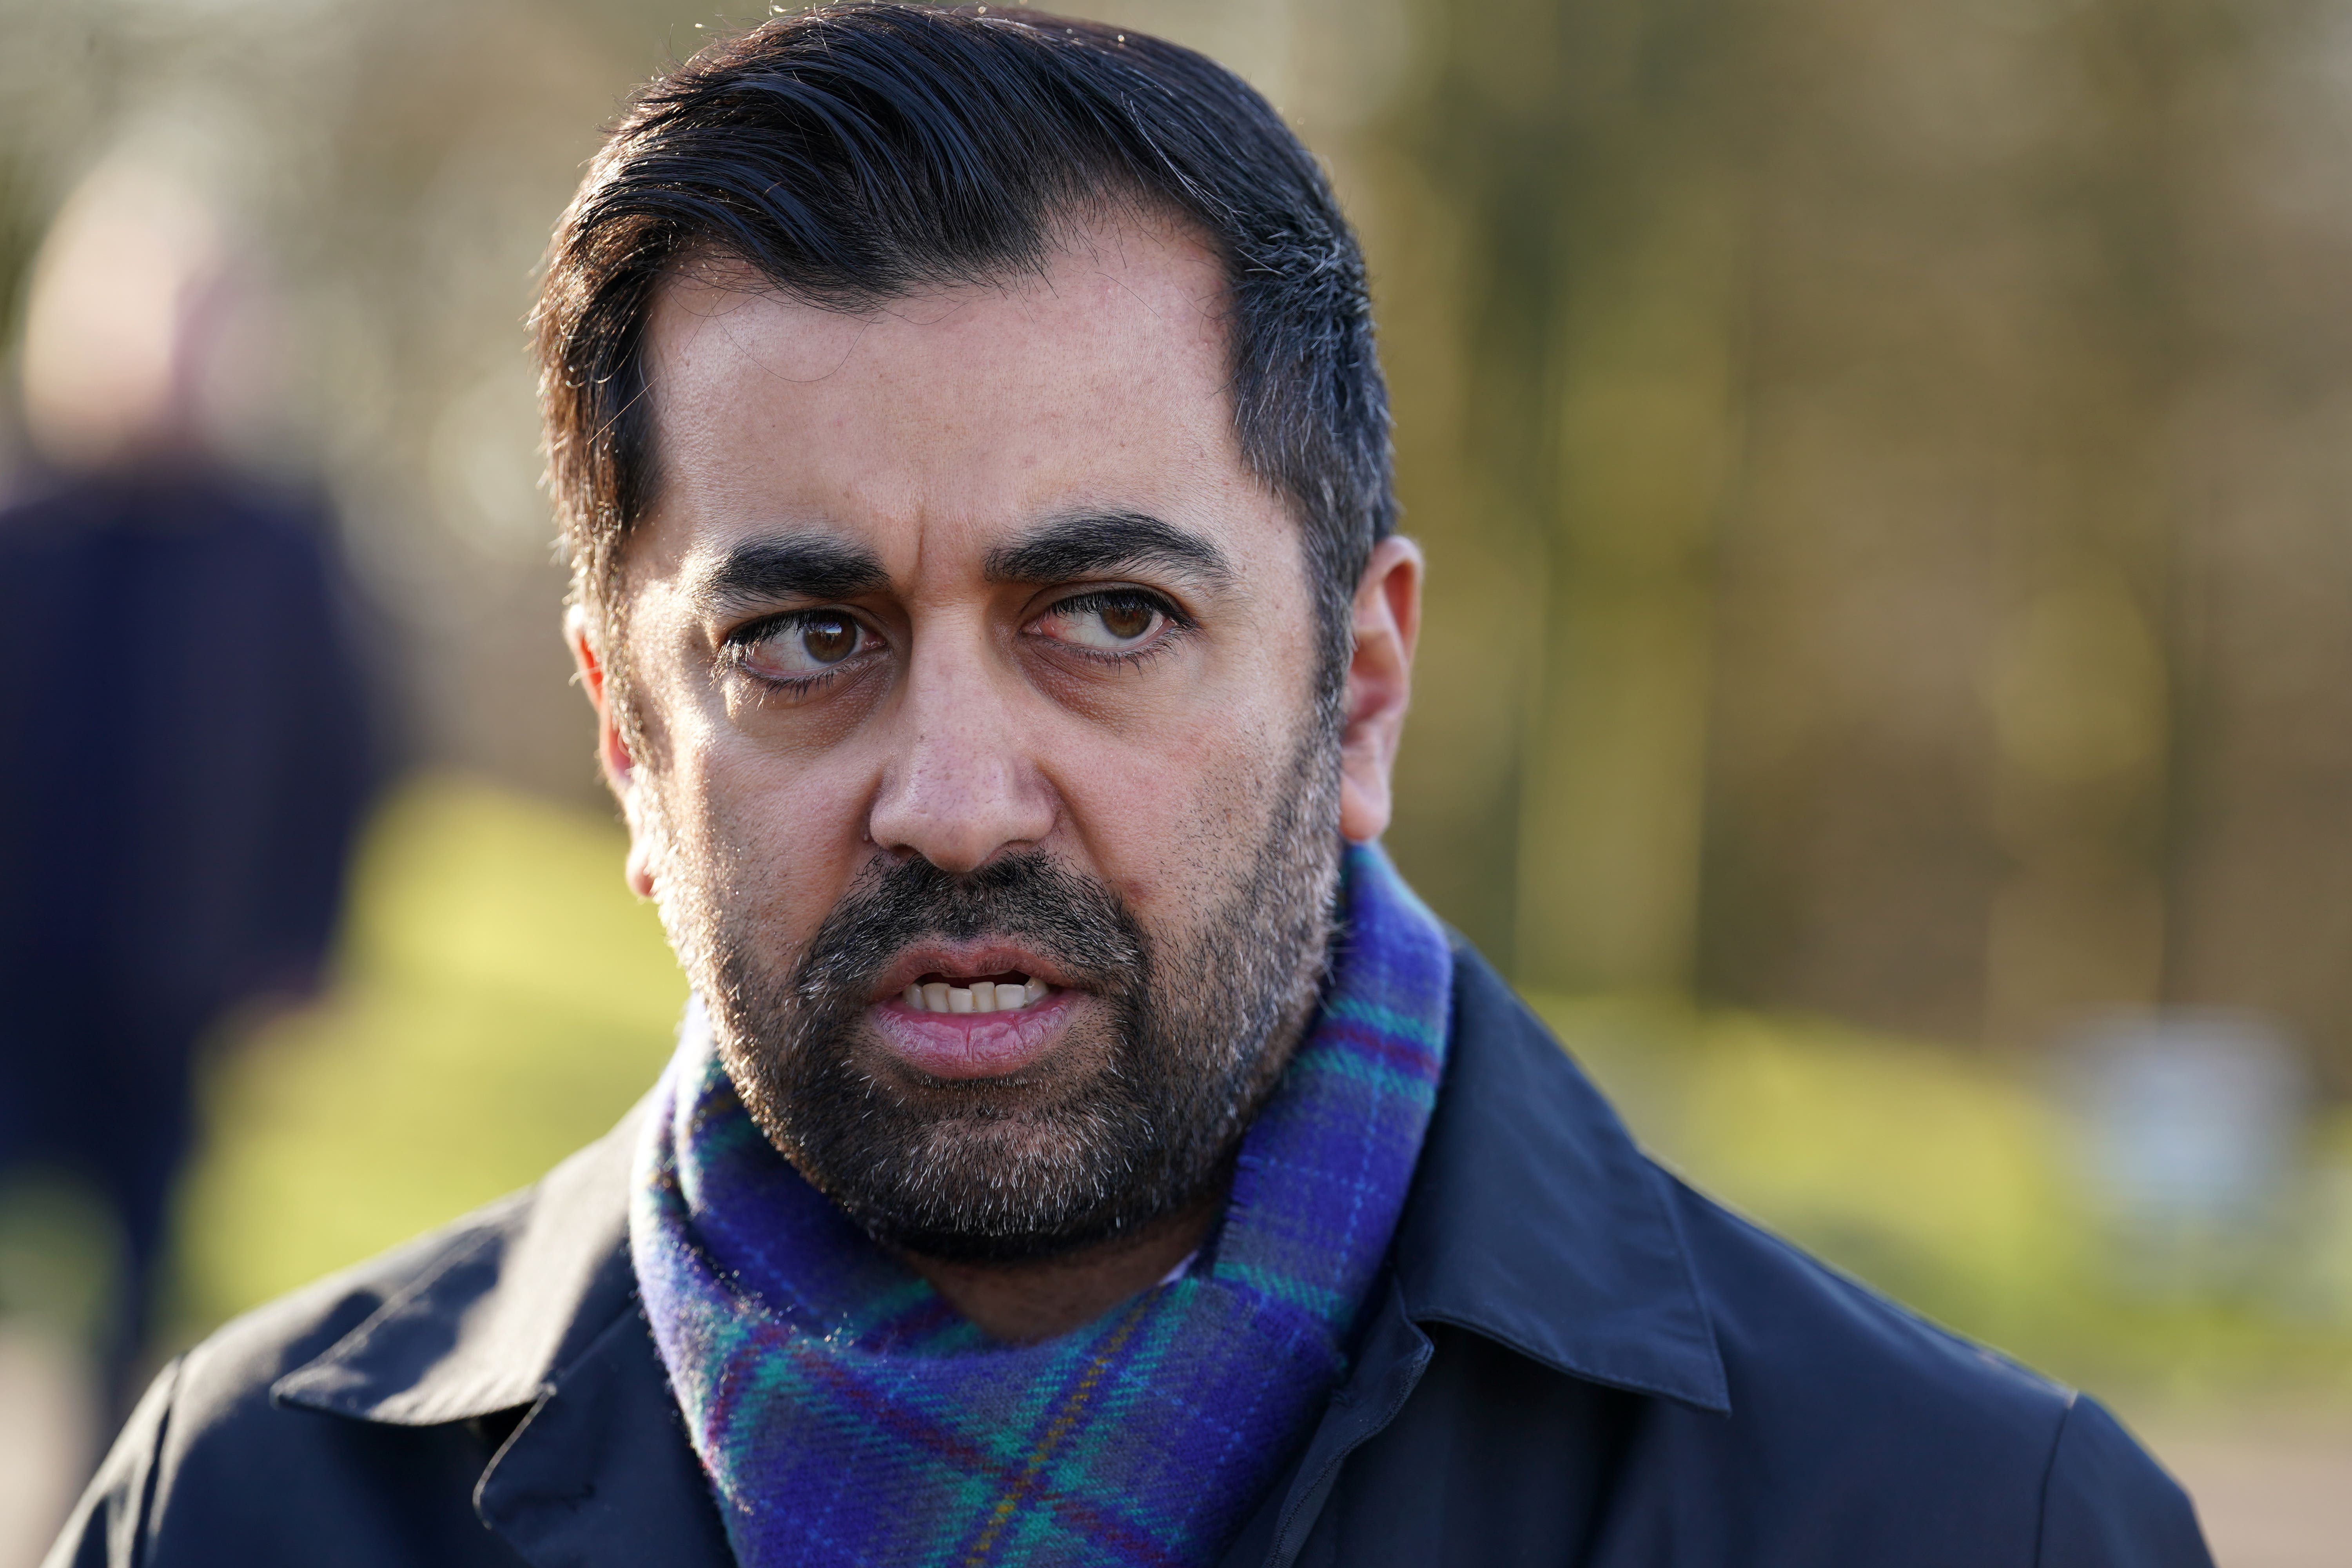 Humza Yousaf has stood down as Scotland’s first minister